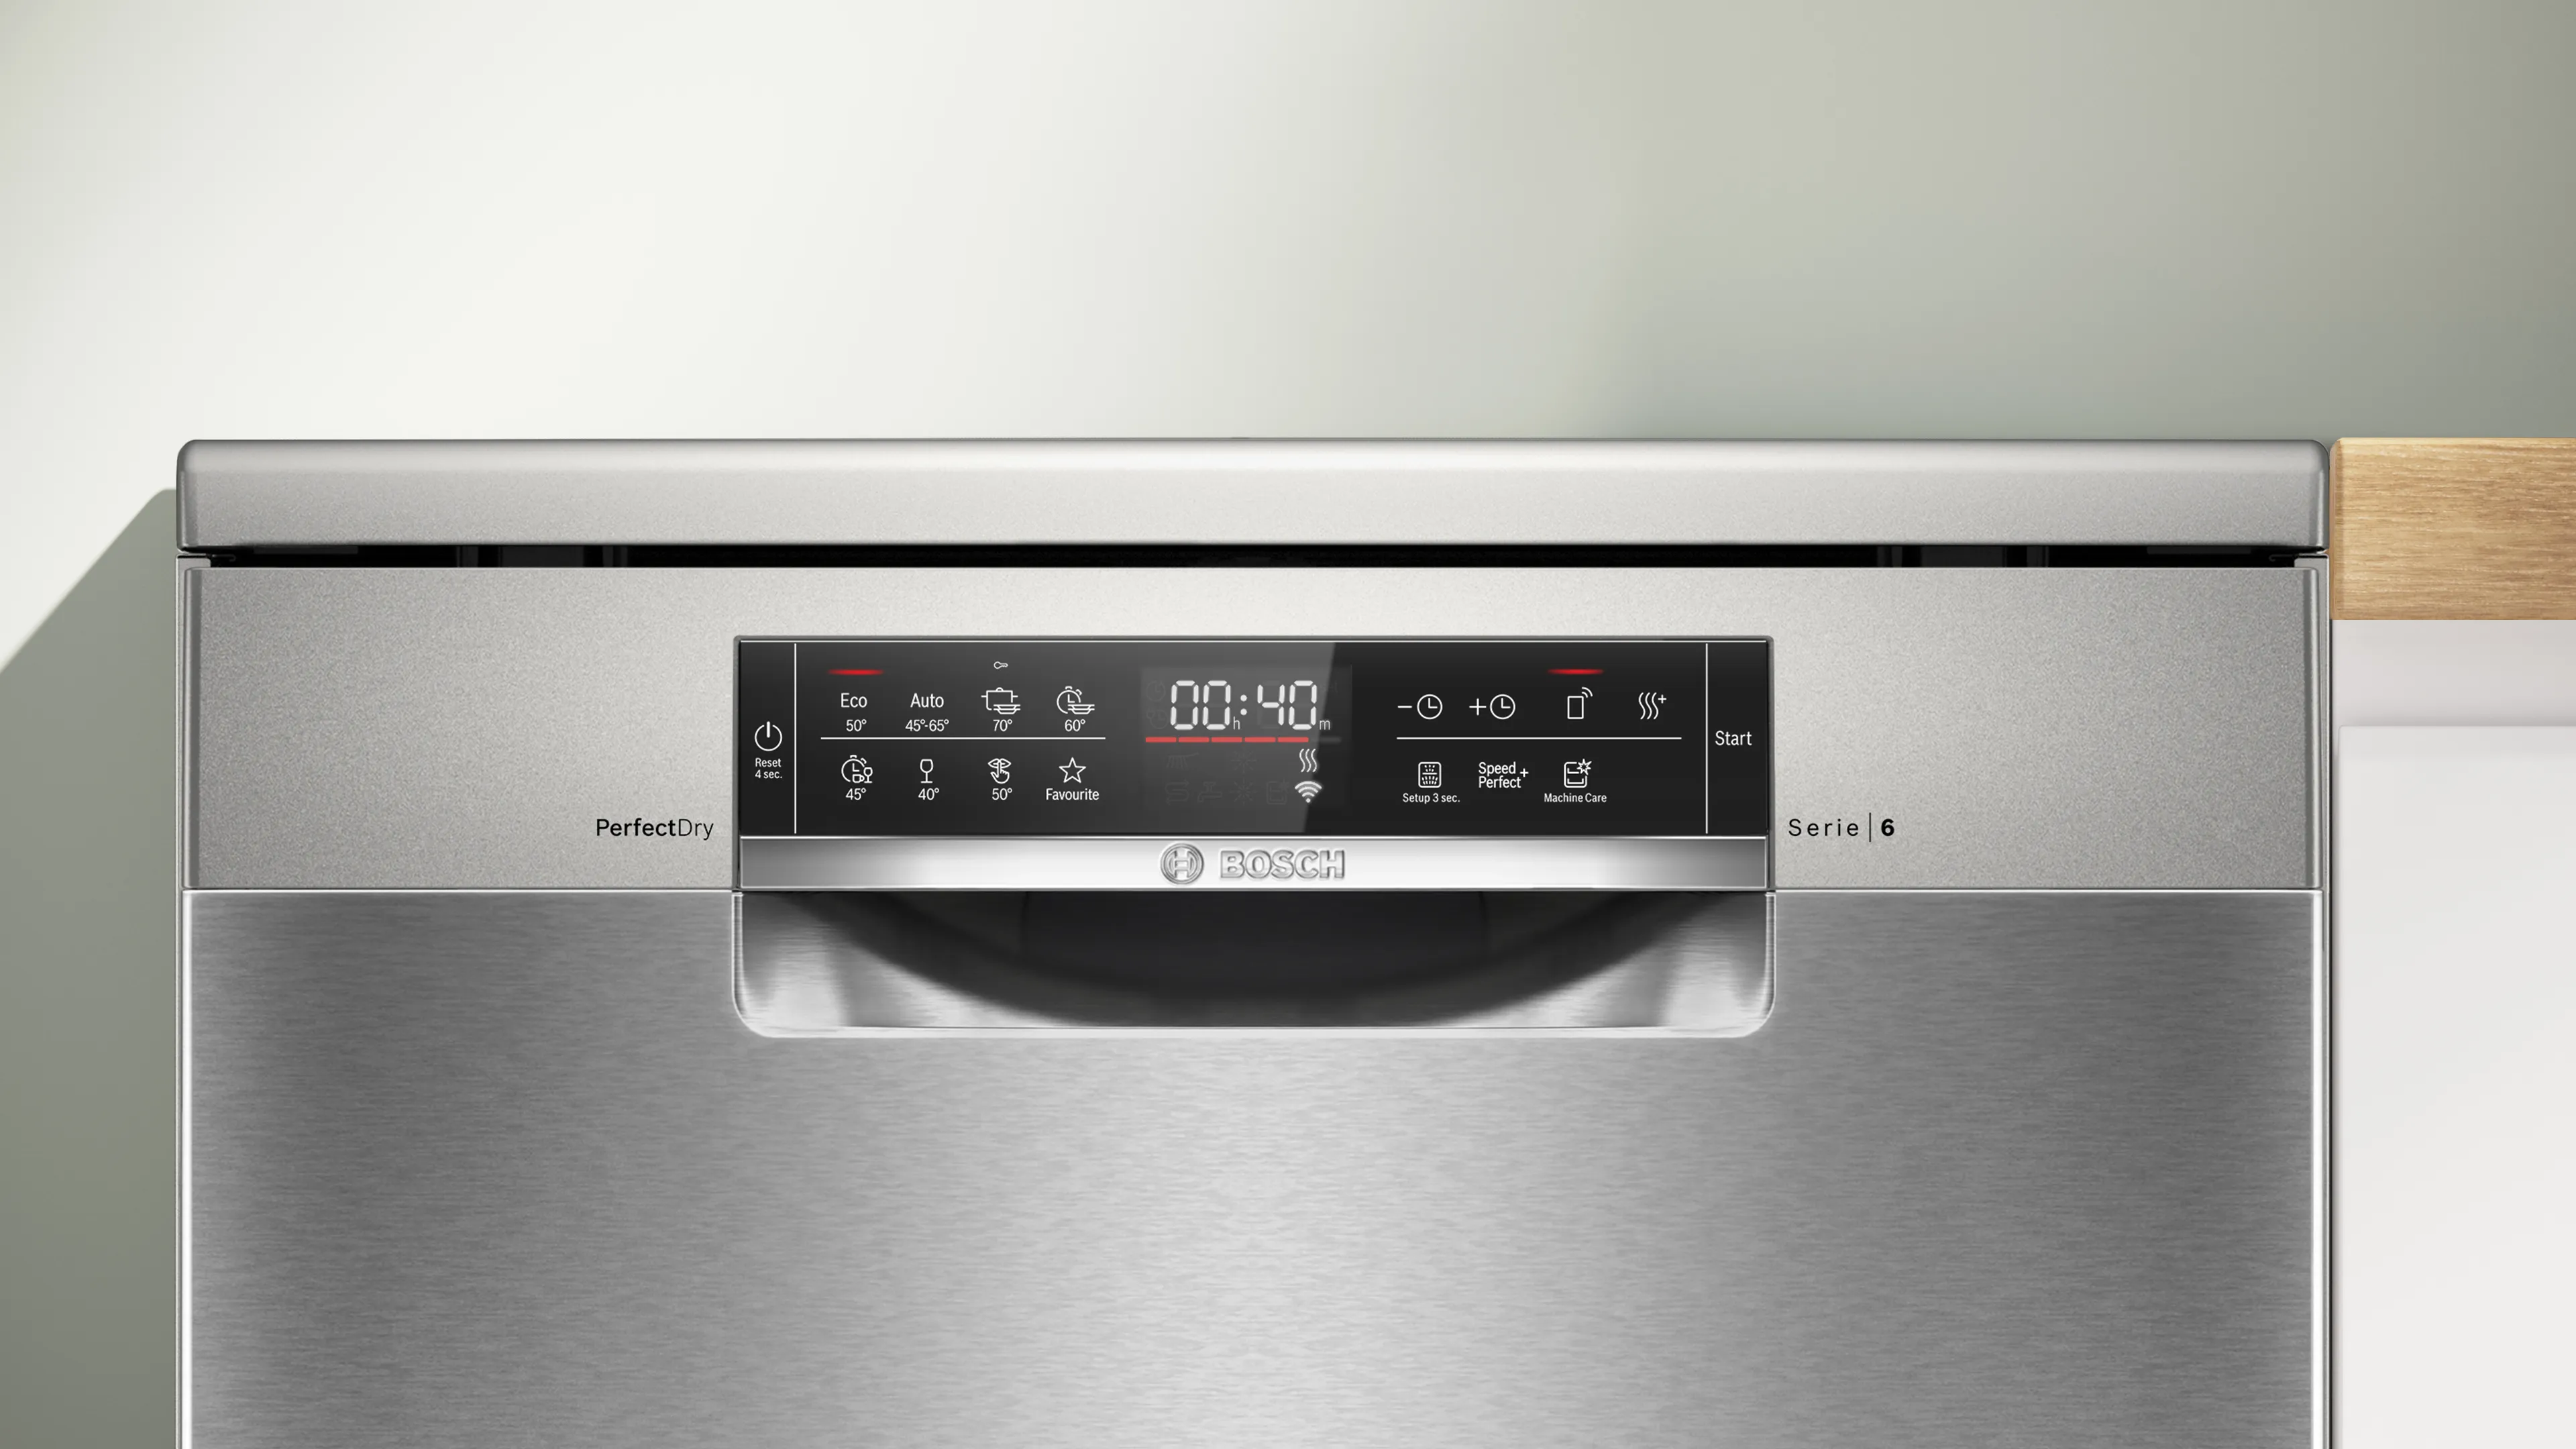 What Are The Features Of The Bosch Series 6 Dishwasher?